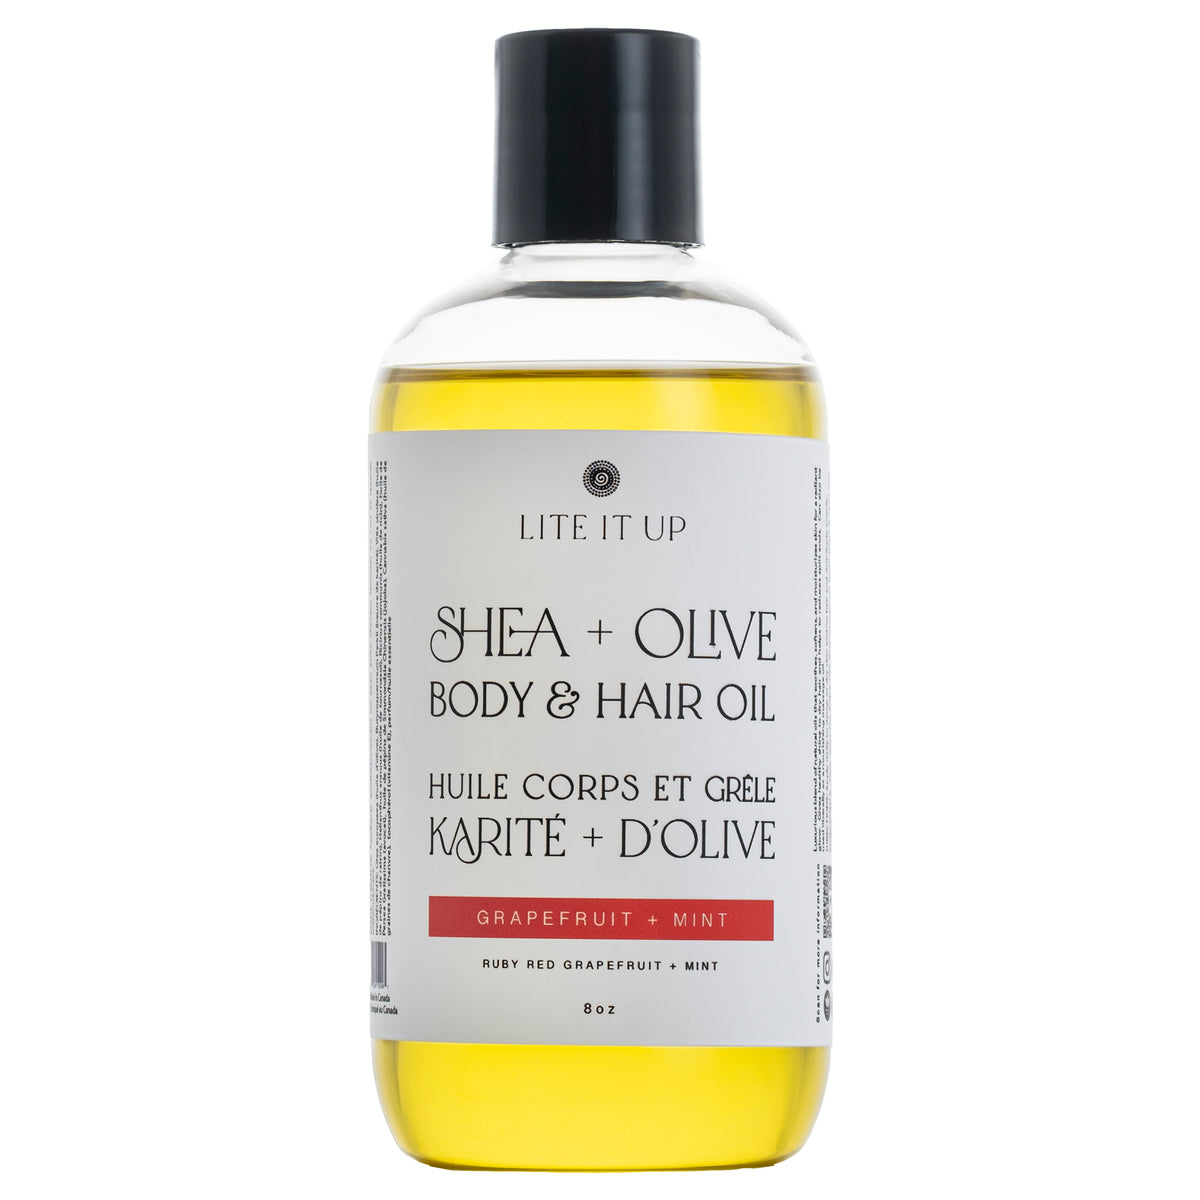 Shea & Olive Body and Hair Oil - GRAPEFRUIT MINT